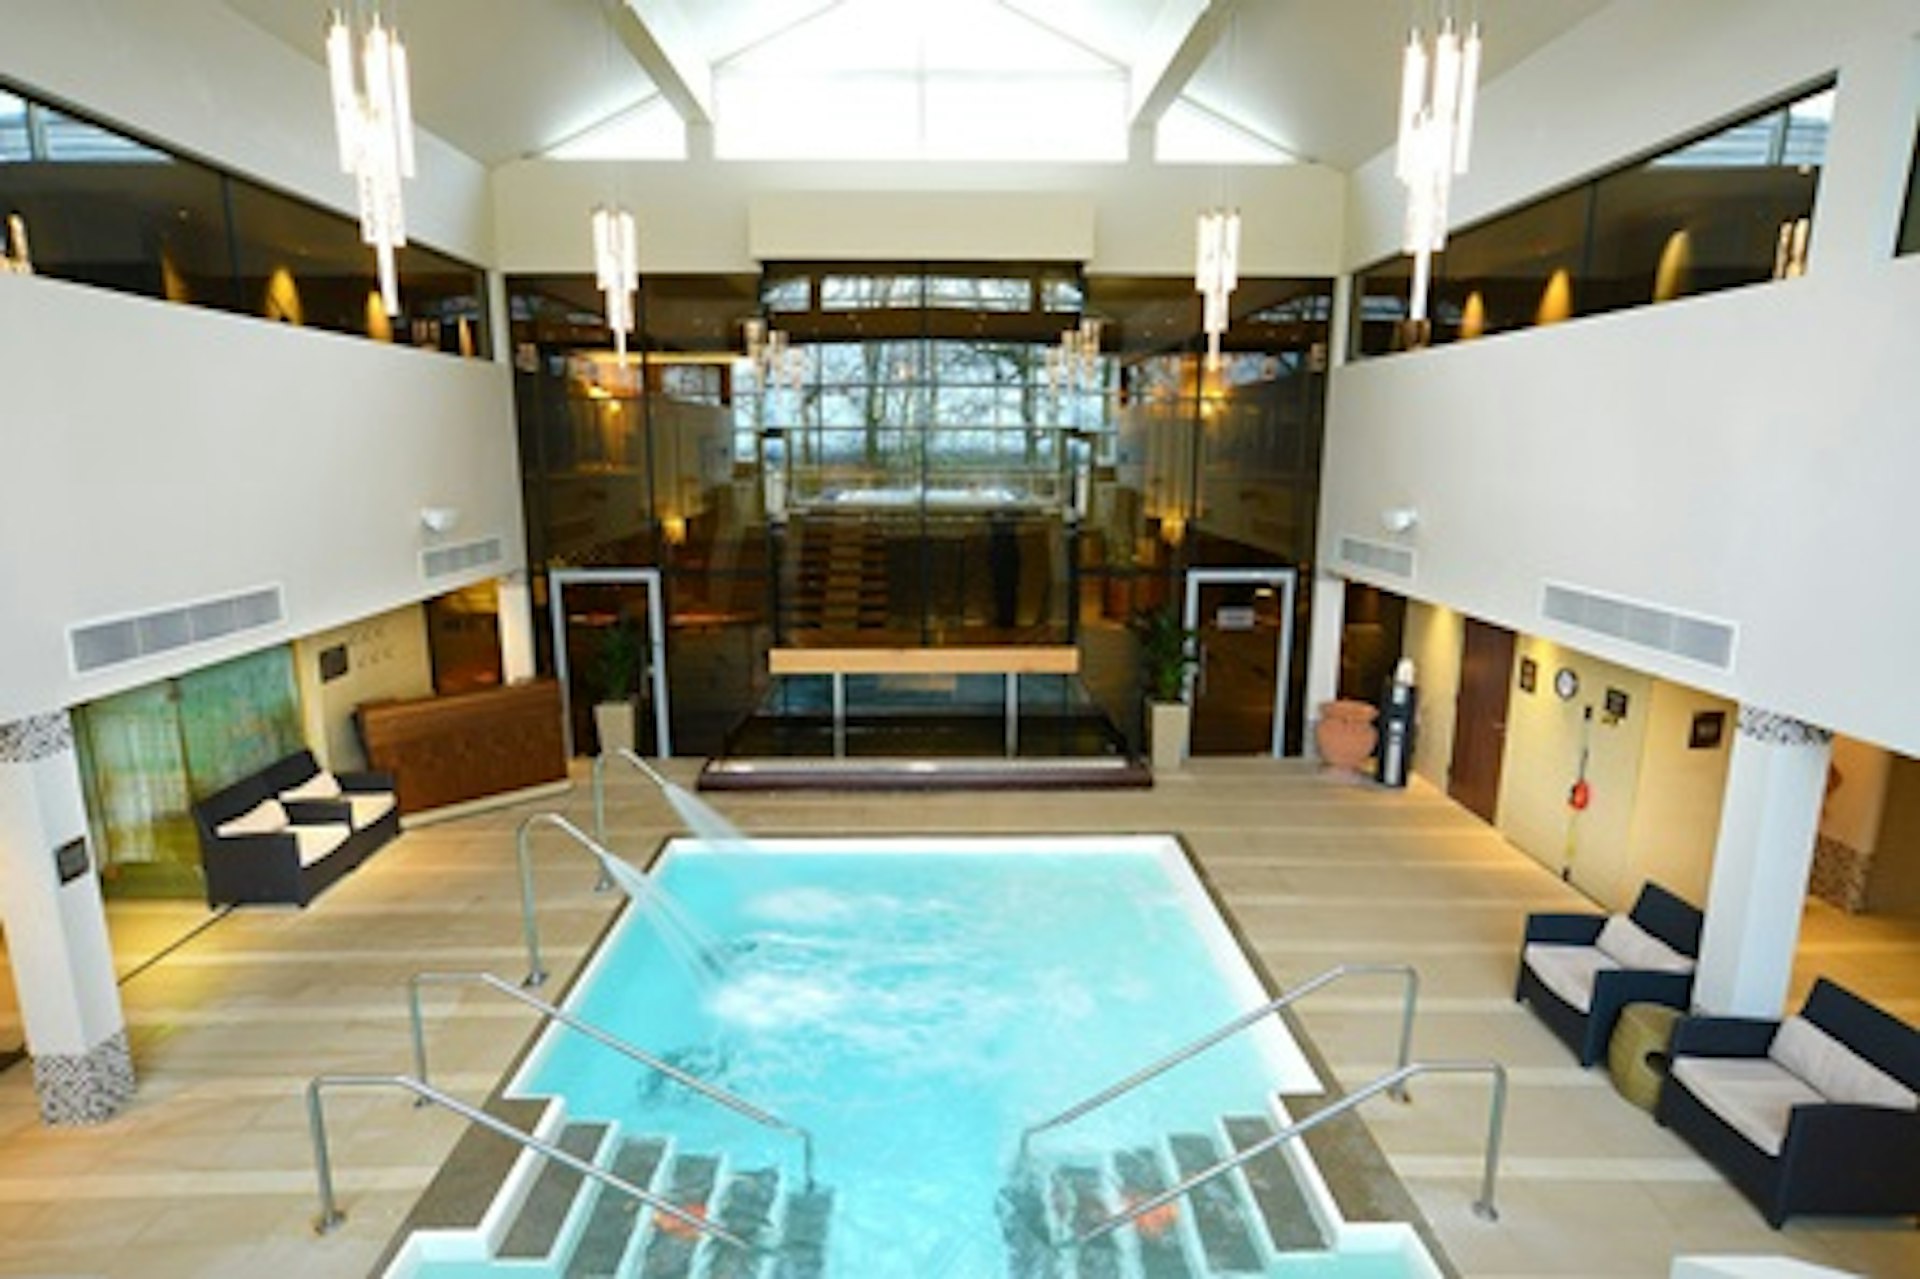 Weekend Aqua Thermal Journey with Lunch for Two at Ribby Hall Village 2